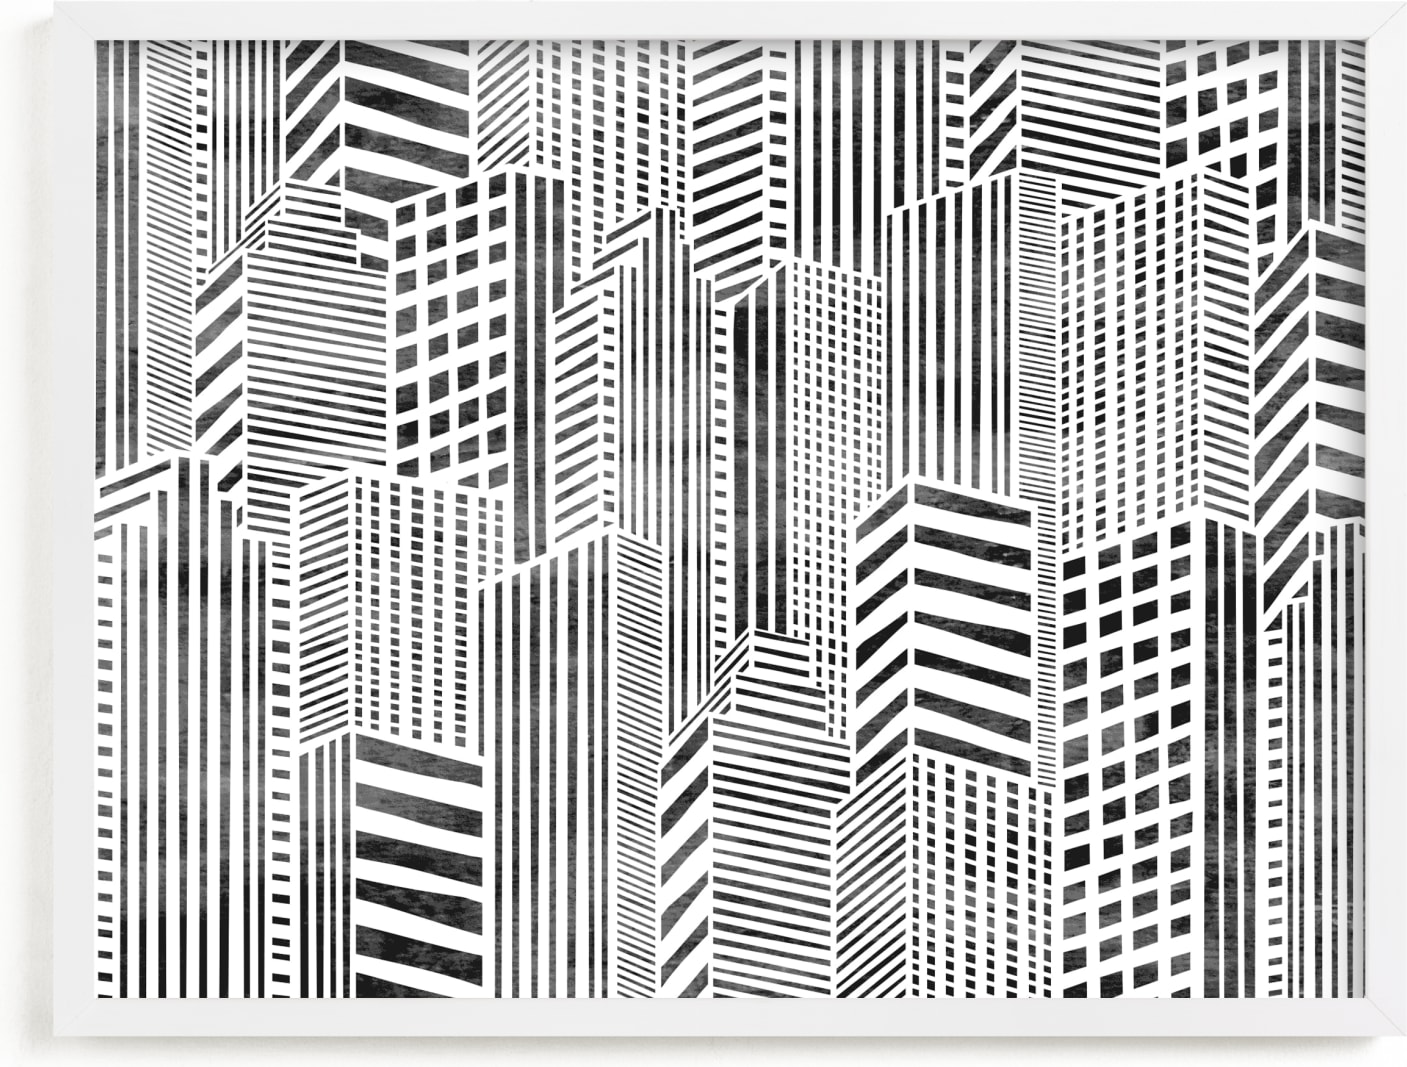 This is a black and white art by Daniela called Linear City.